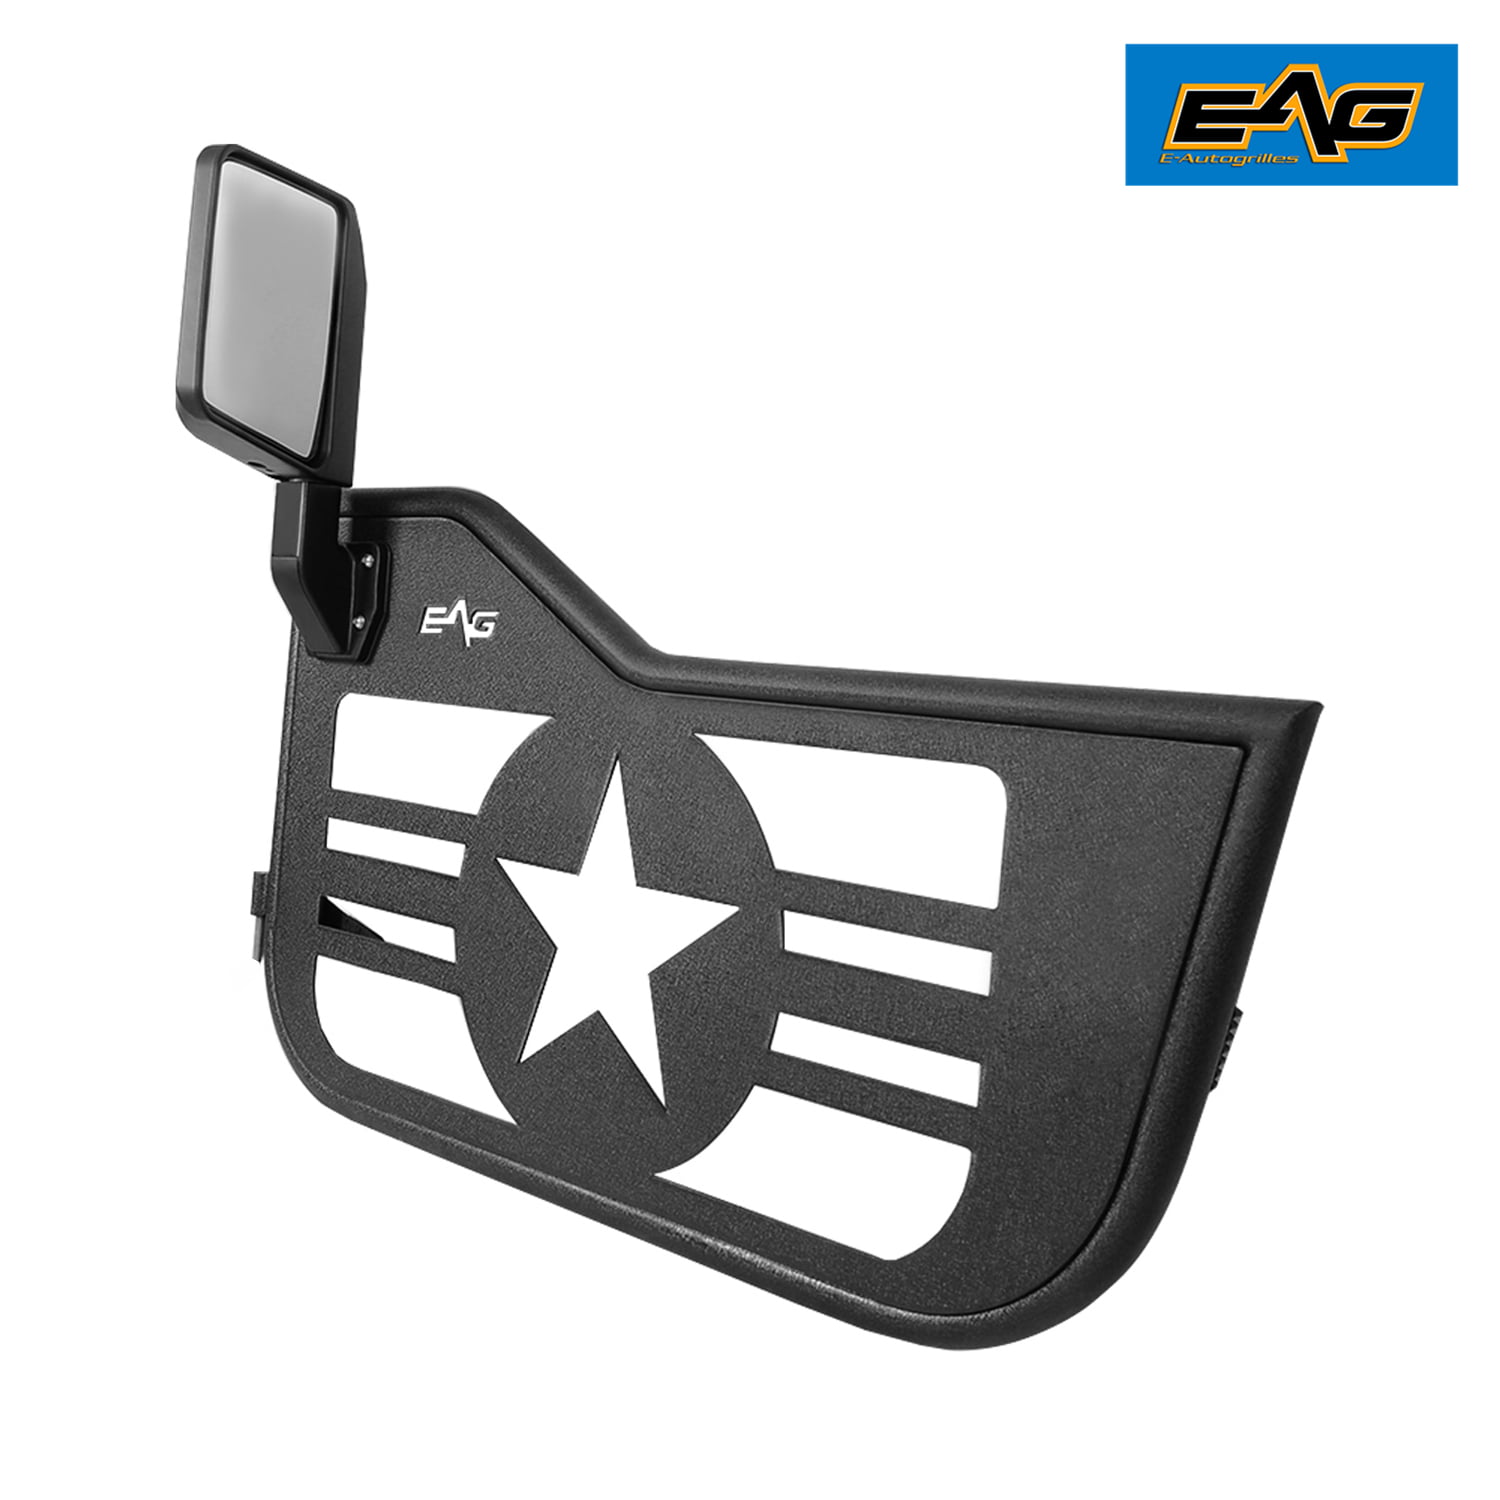 EAG Military Star 2 Tubular Door with Side View Mirror for 81-86 Jeep Wrangler CJ7/ 87-96 YJ 